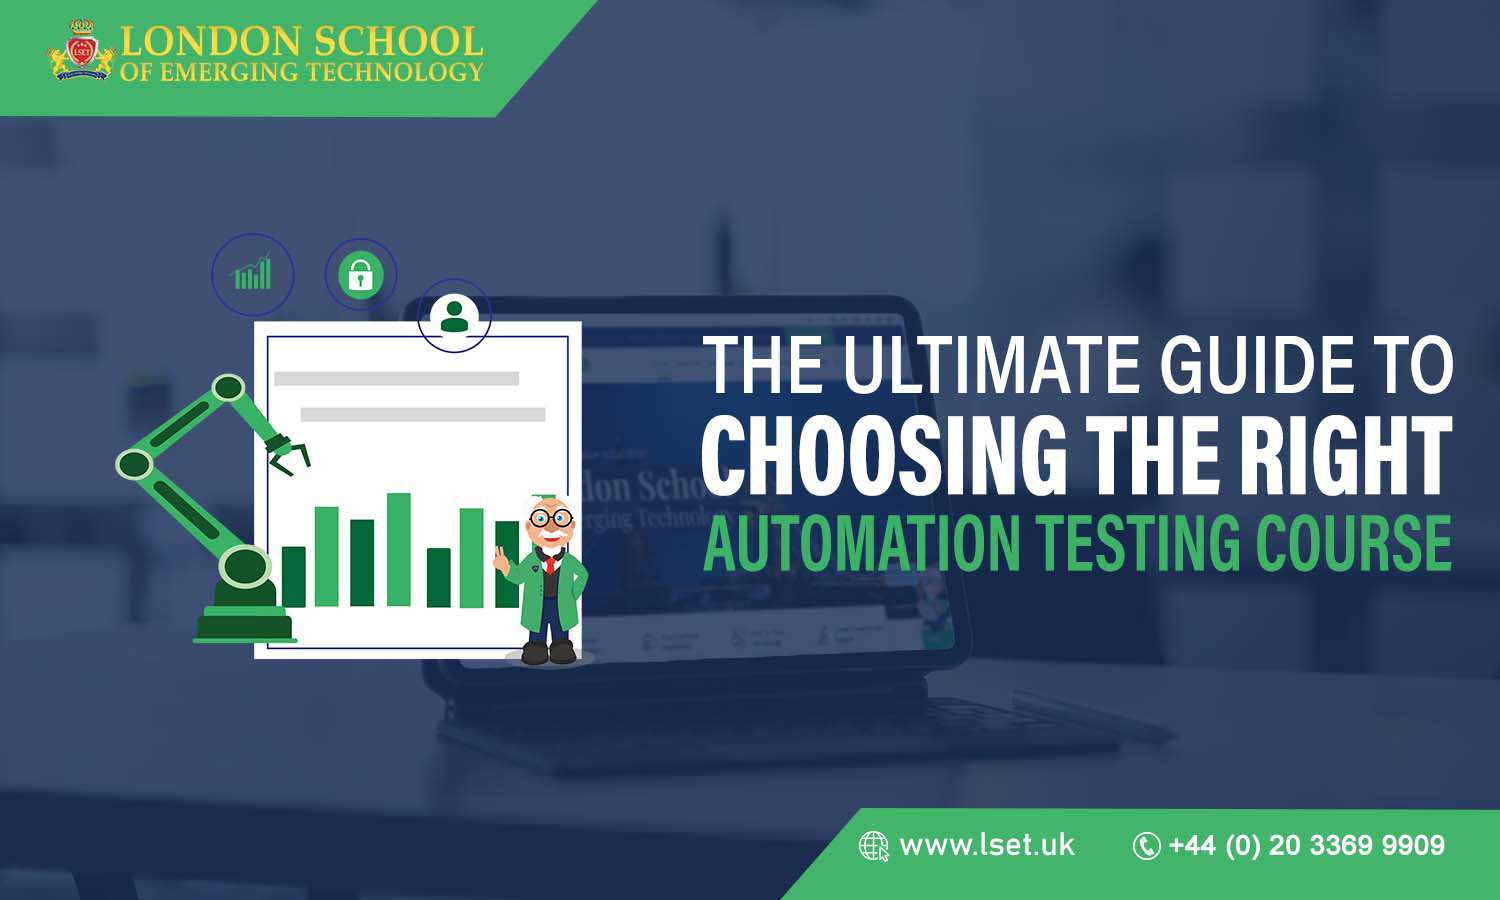 The Ultimate Guide to Choosing the Right Automation Testing Course